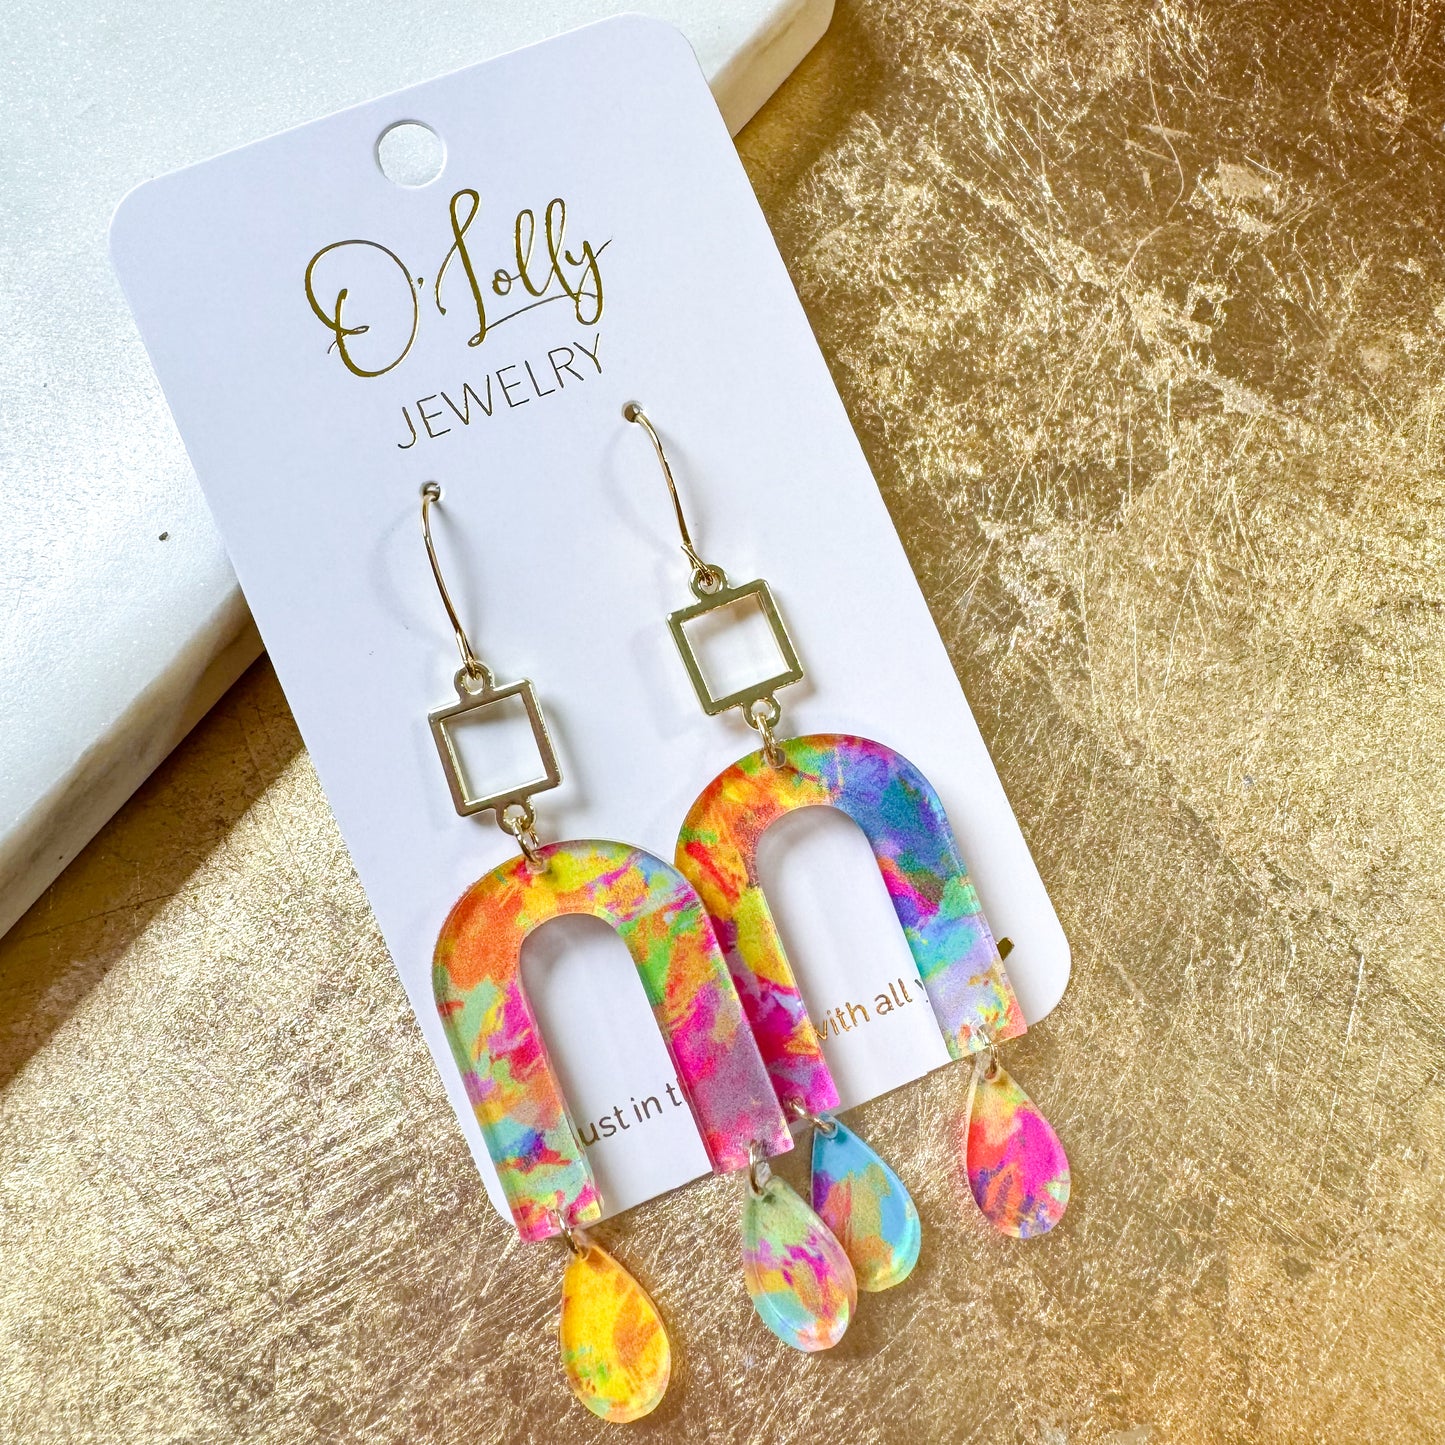 O’Lolly “Macy” Earrings - Gold Square w/Colorful Acrylic Dangles